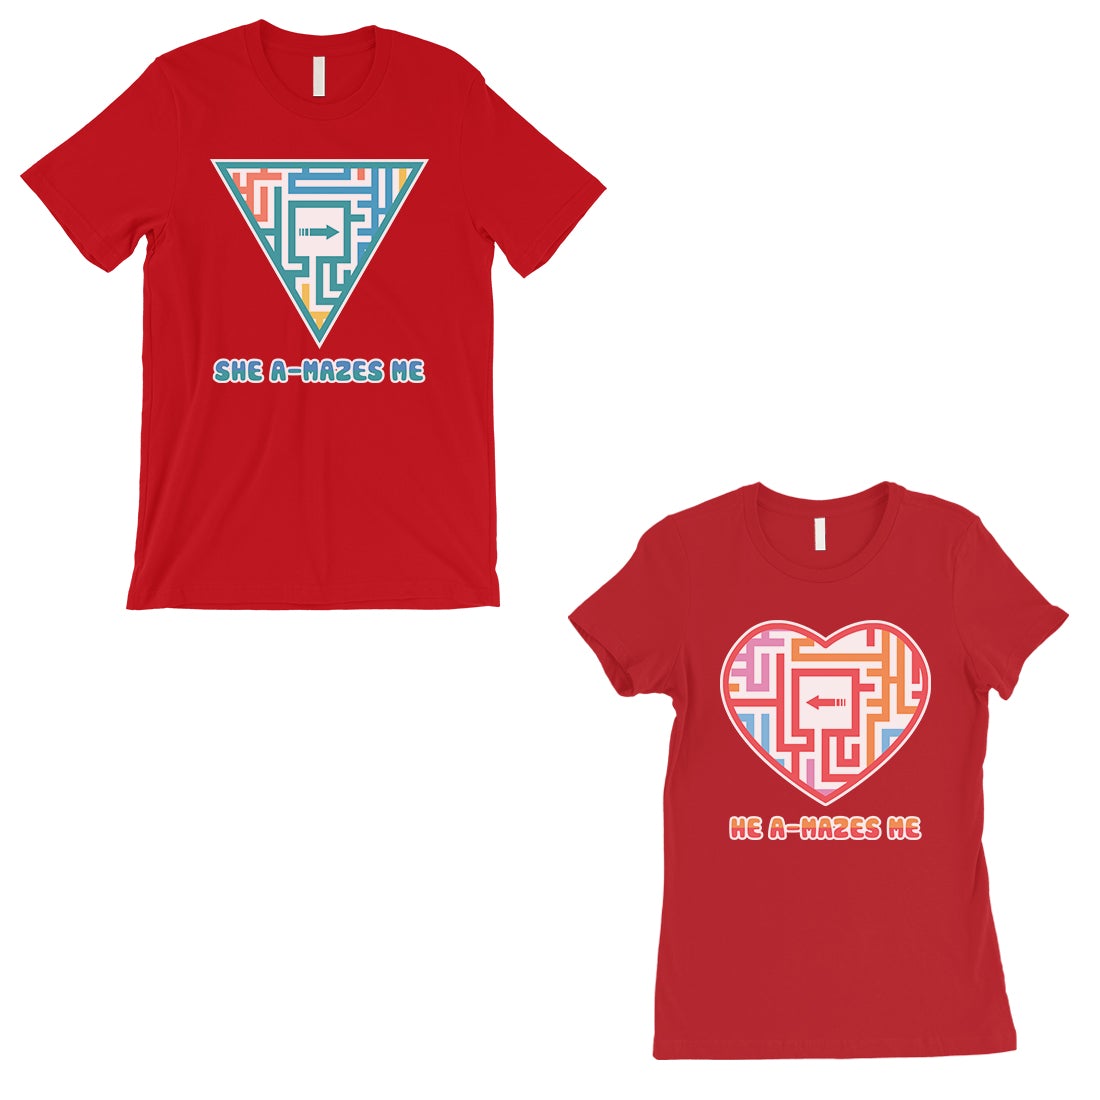 A-Mazes Me Red Matching Couples T-Shirts